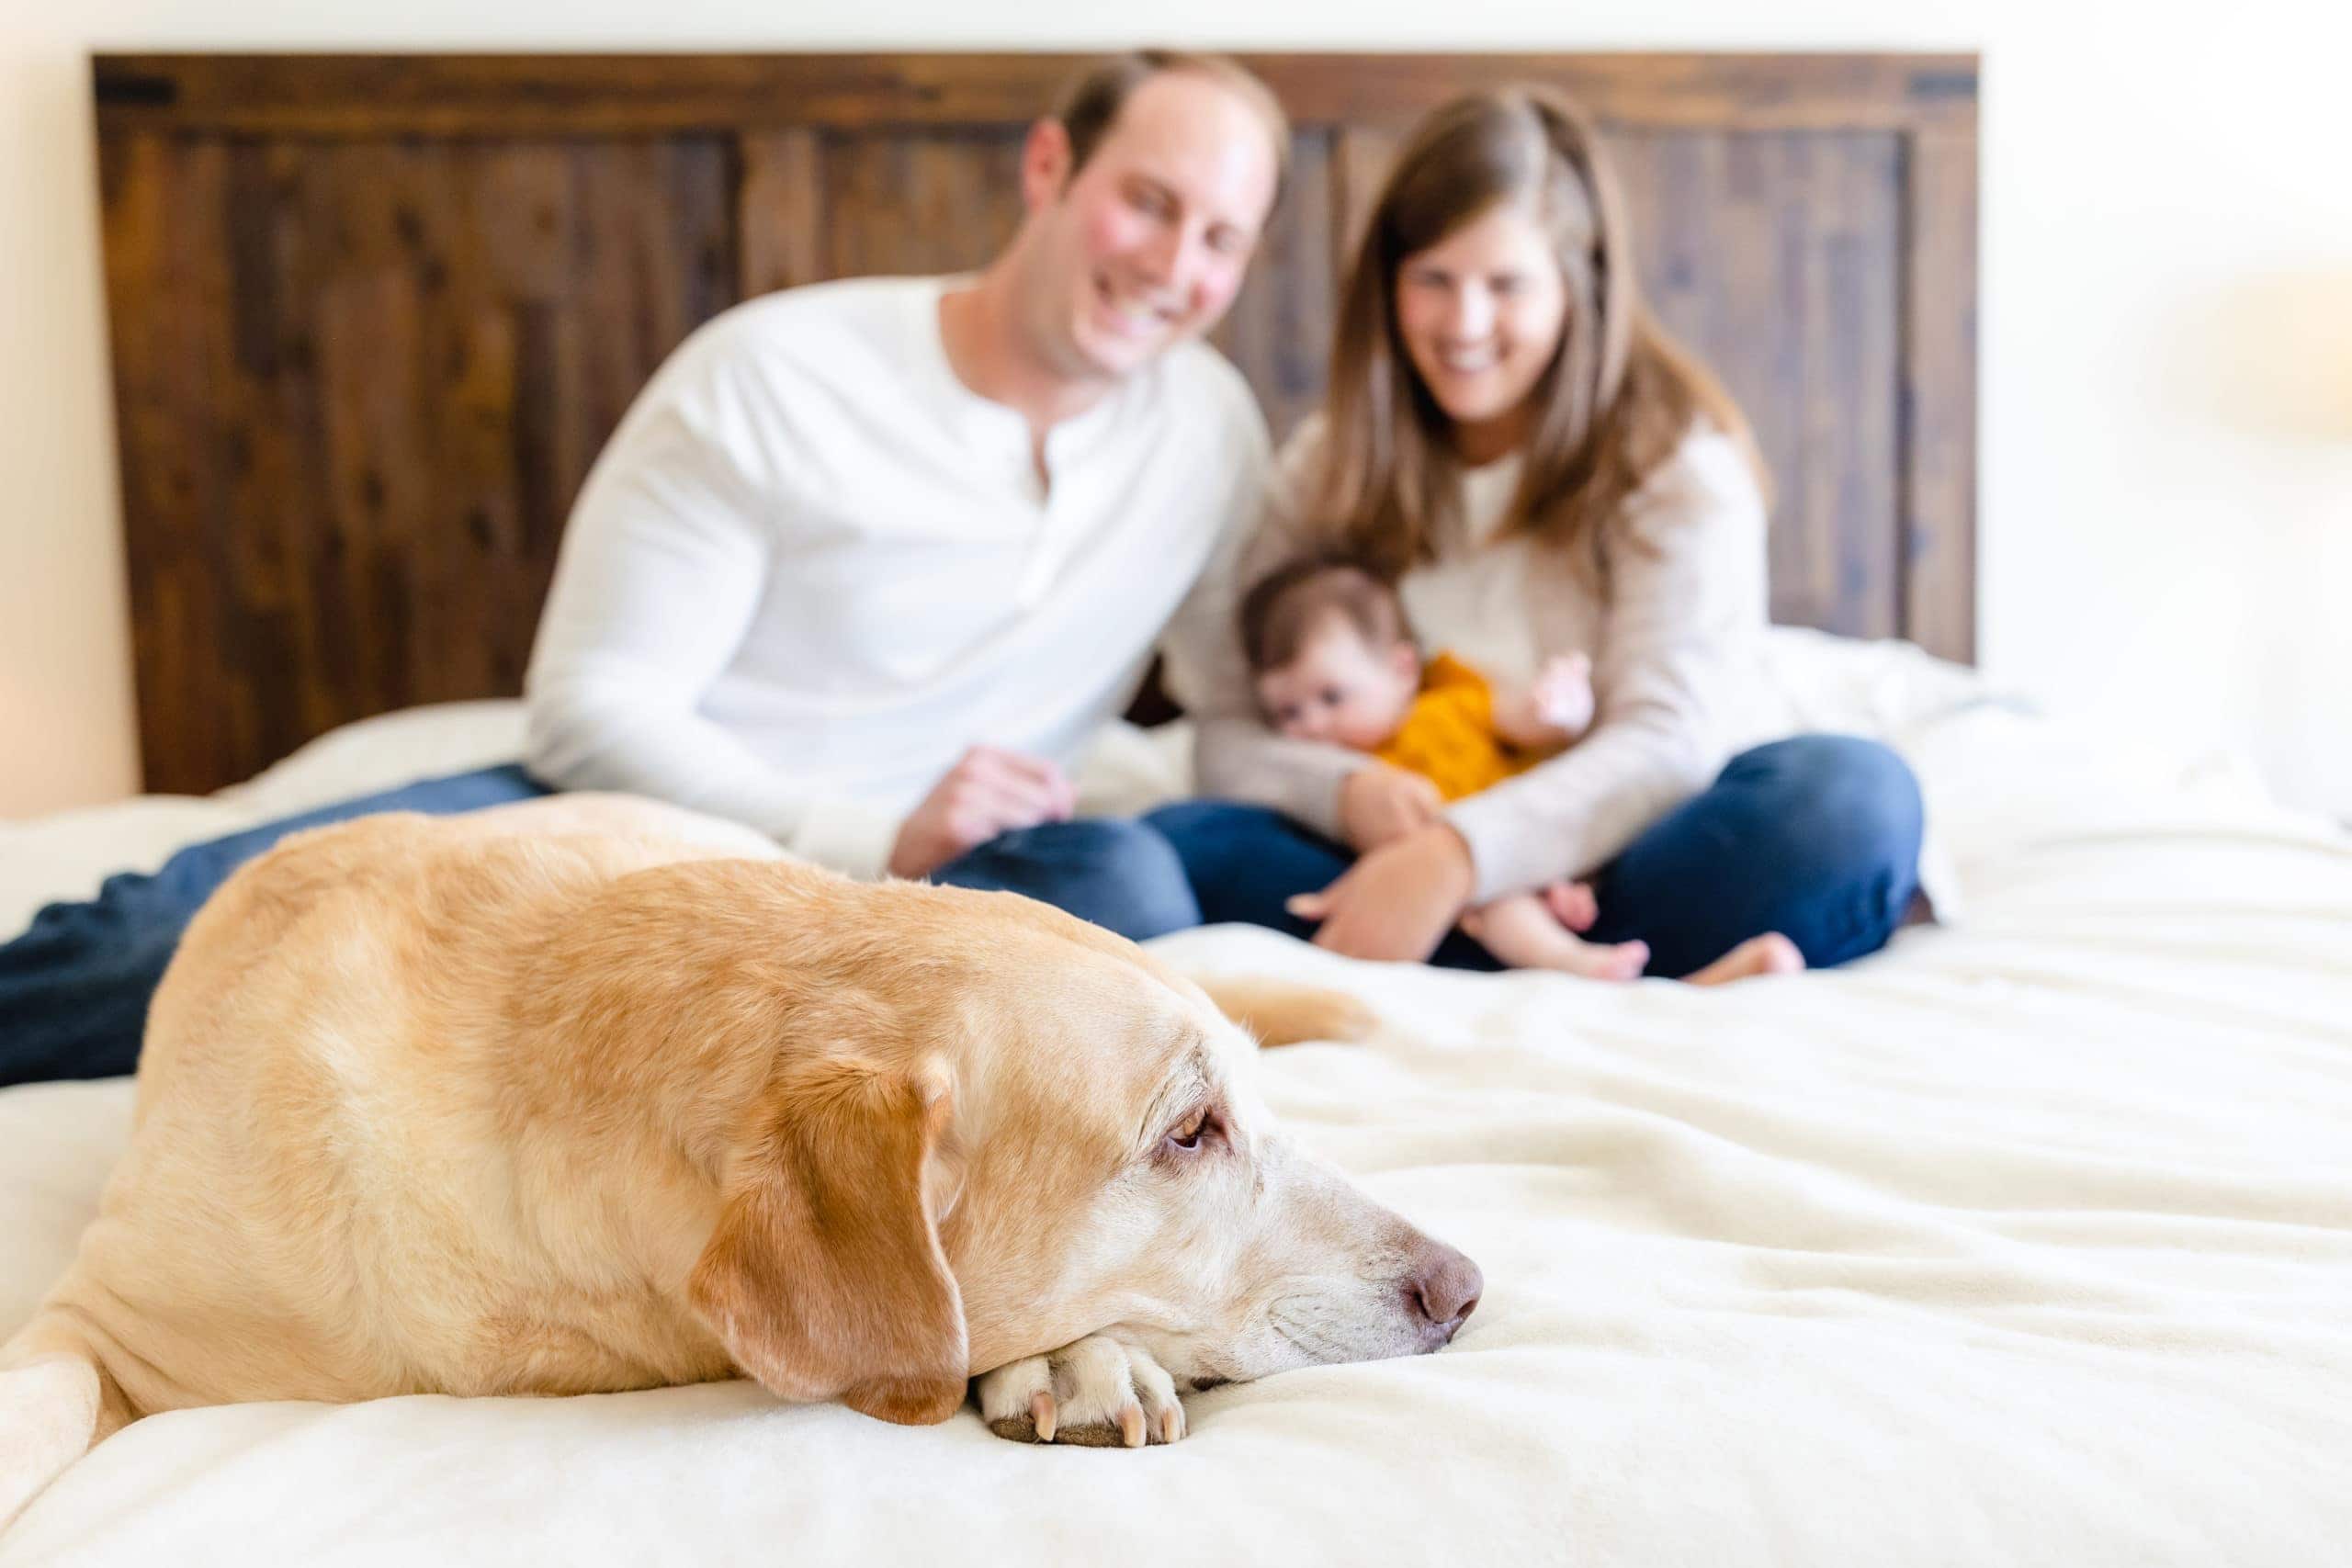 Image features up close details of a family's golden retriever sitting on the edge of the bed in front of the family. The family is cuddled up on the bed behind the dog, out of focus in the background. They are posing for their family in-home newborn lifestyle photo shoot.